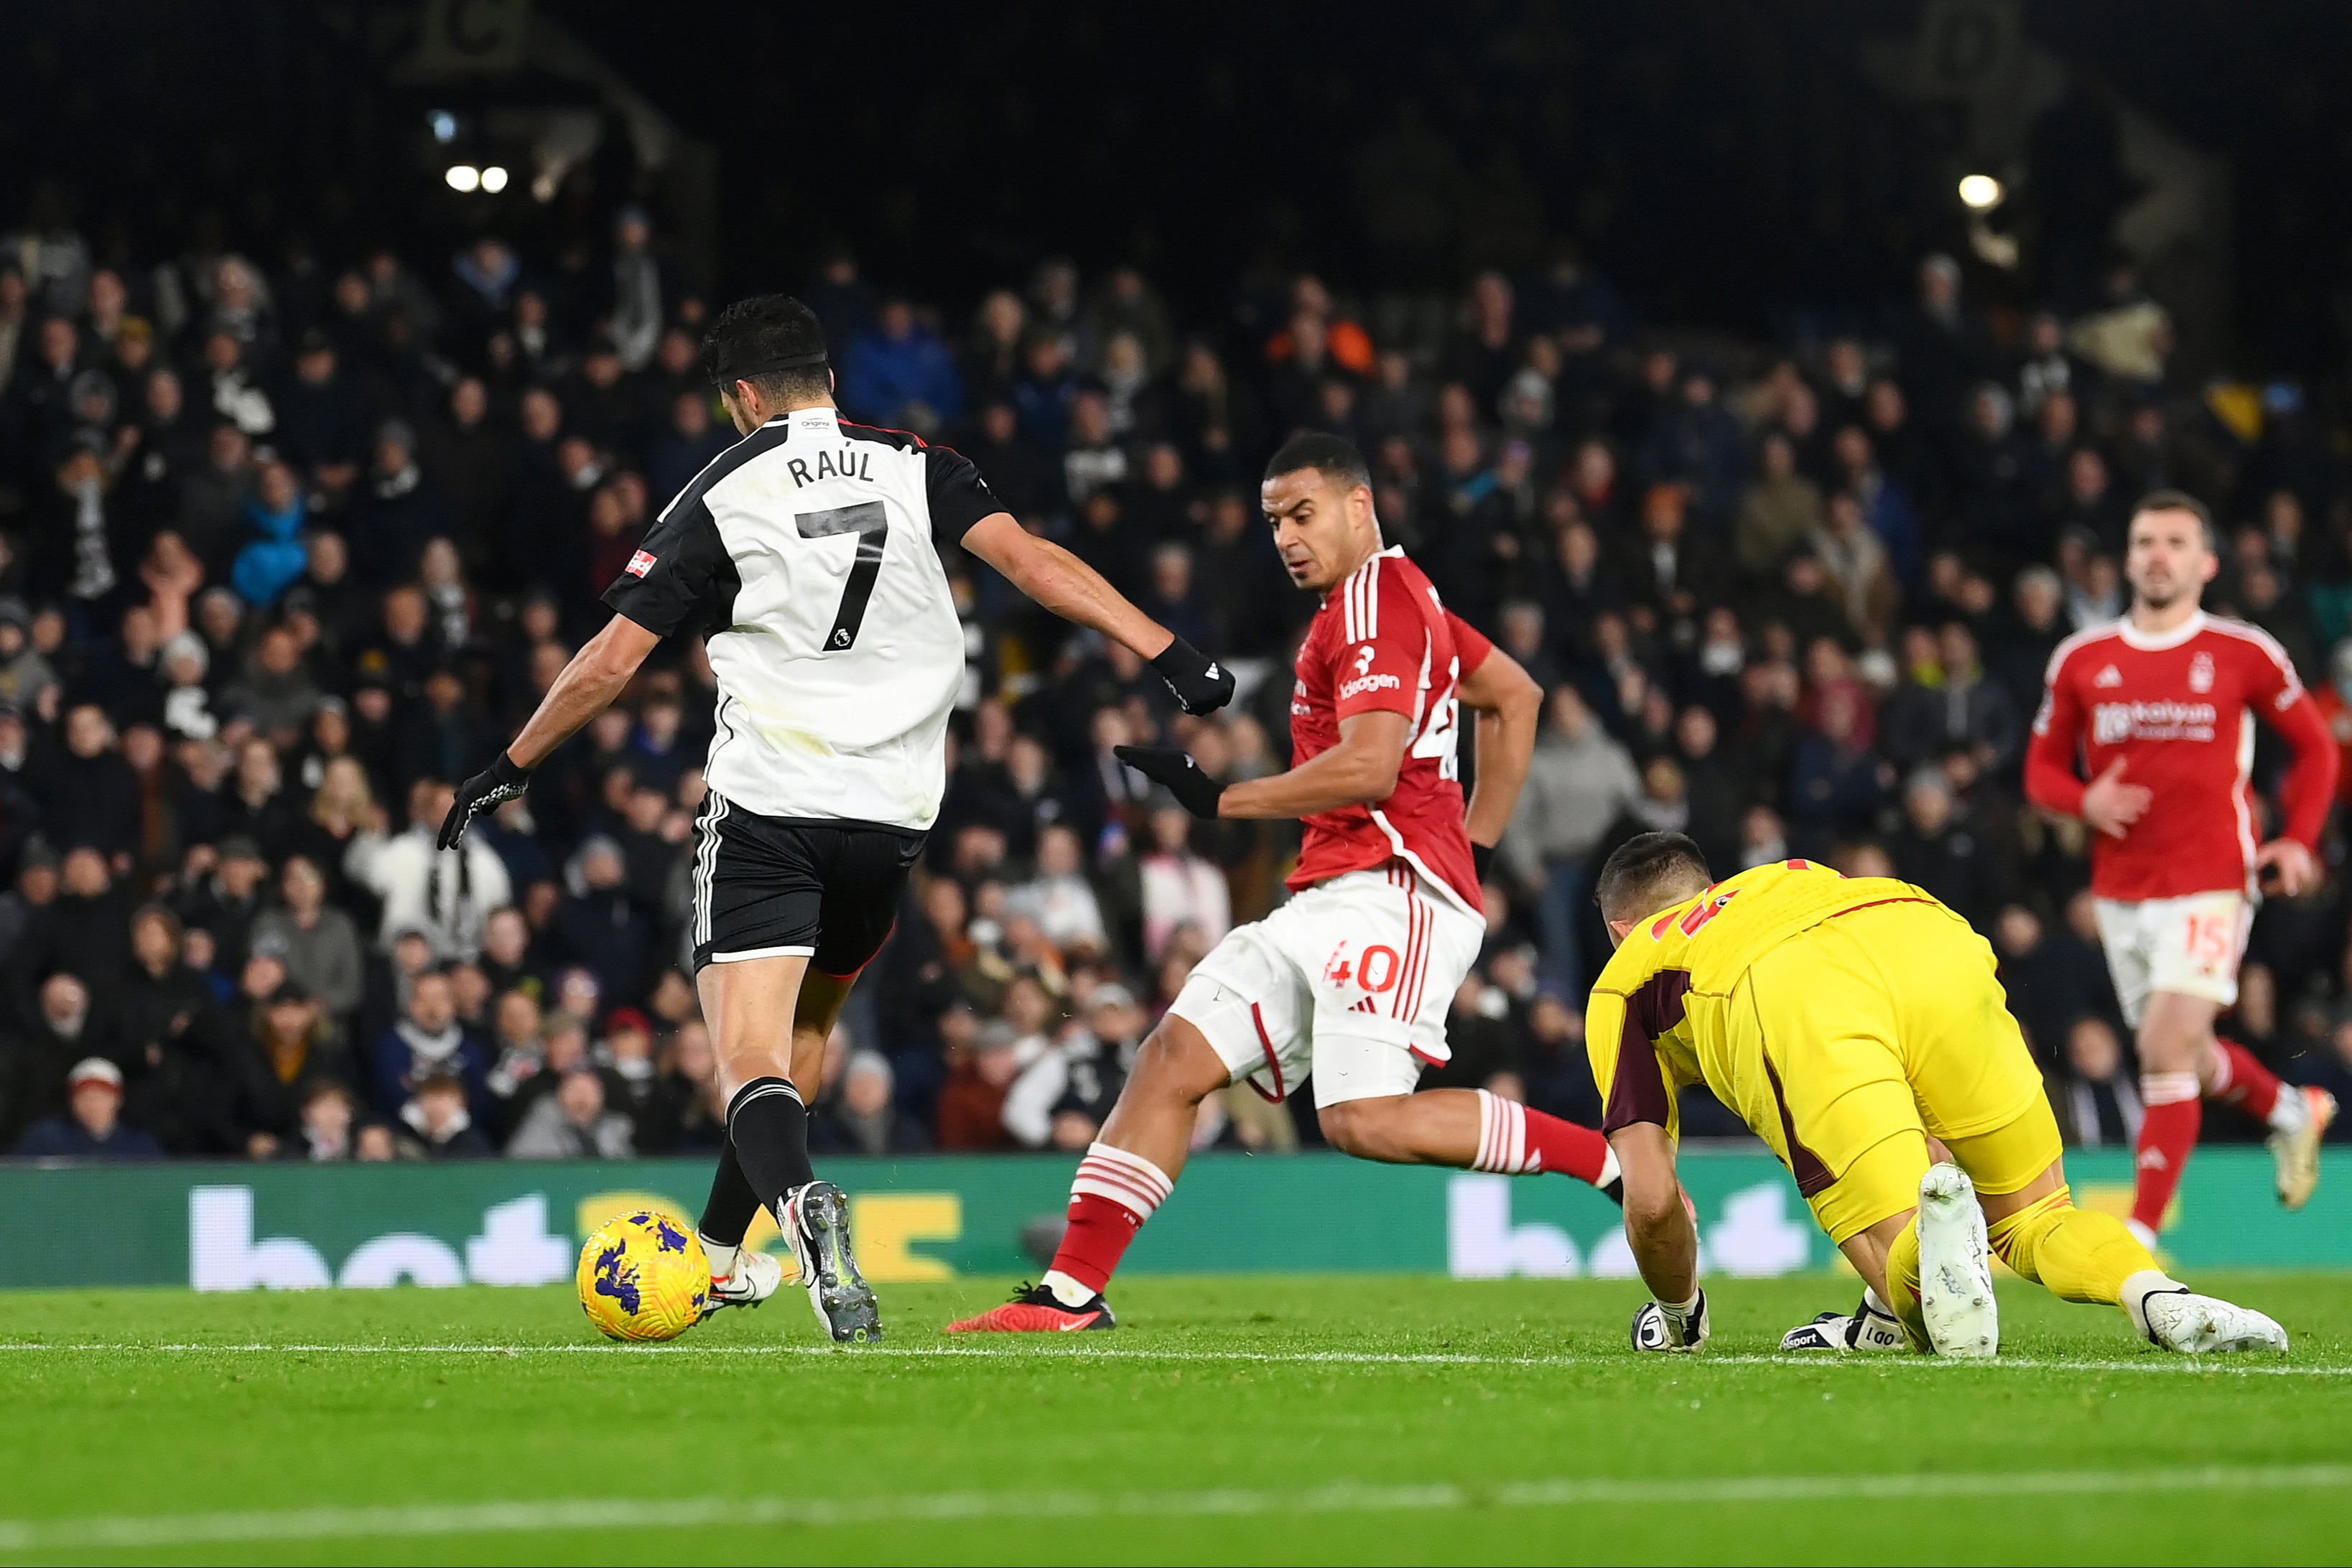 A cute backheel was one of two goals for Raul Jimenez in a big home win for Fulham